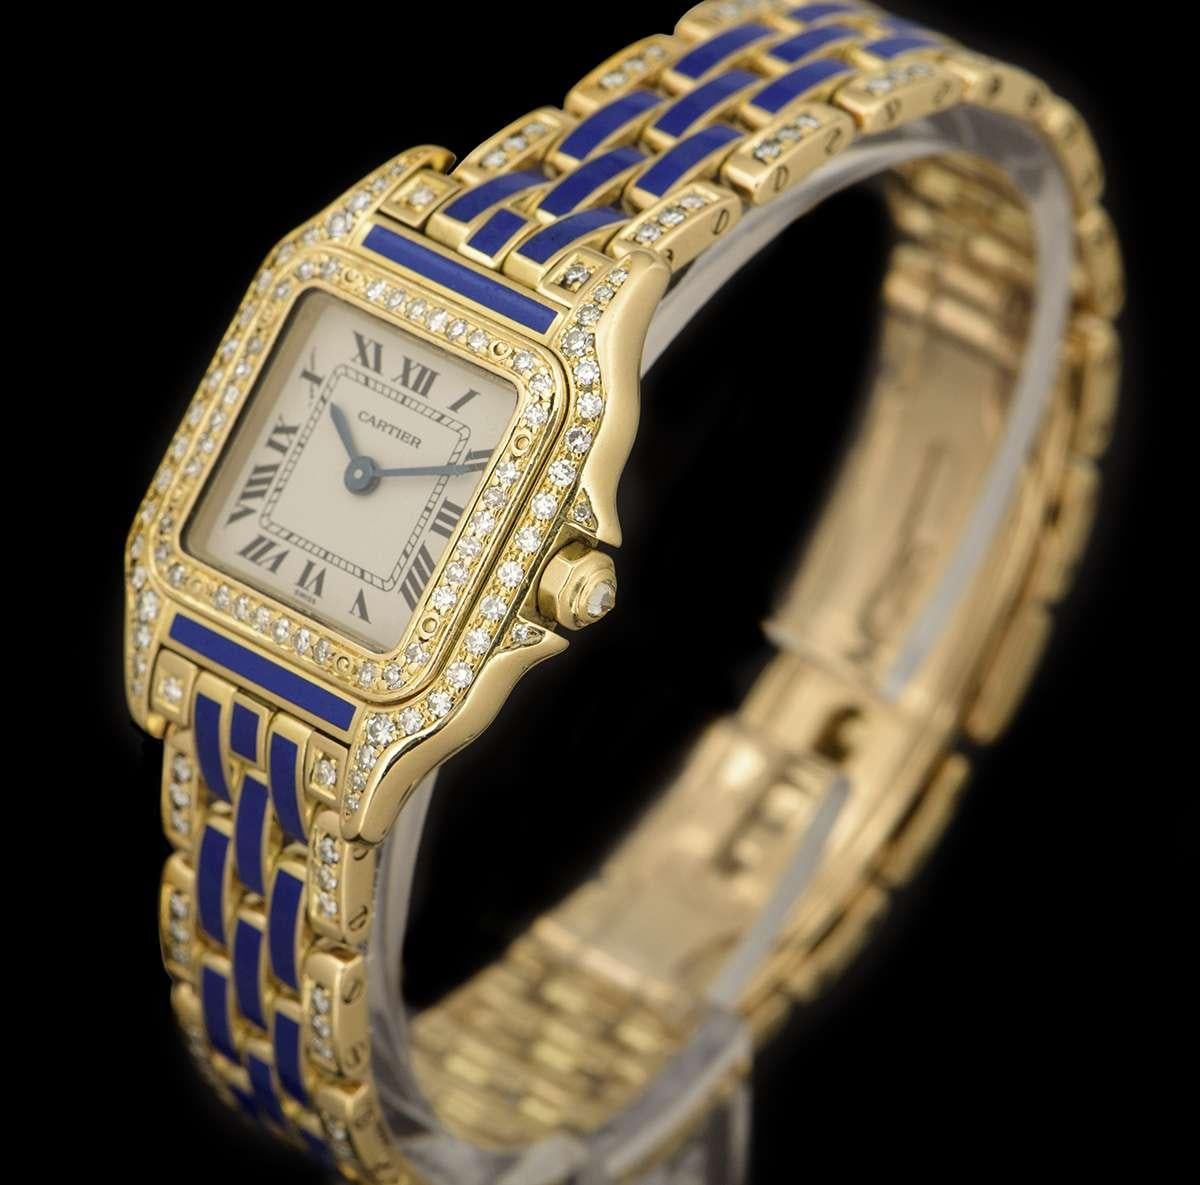 A very rare 22 mm Panthere women's wristwatch, by Cartier. 

This stunning timepiece displays time on a silver dial, behind a sapphire crystal.

This is a stunning timepiece, crafted from 18k yellow gold, featuring a fixed bezel set with 36 round